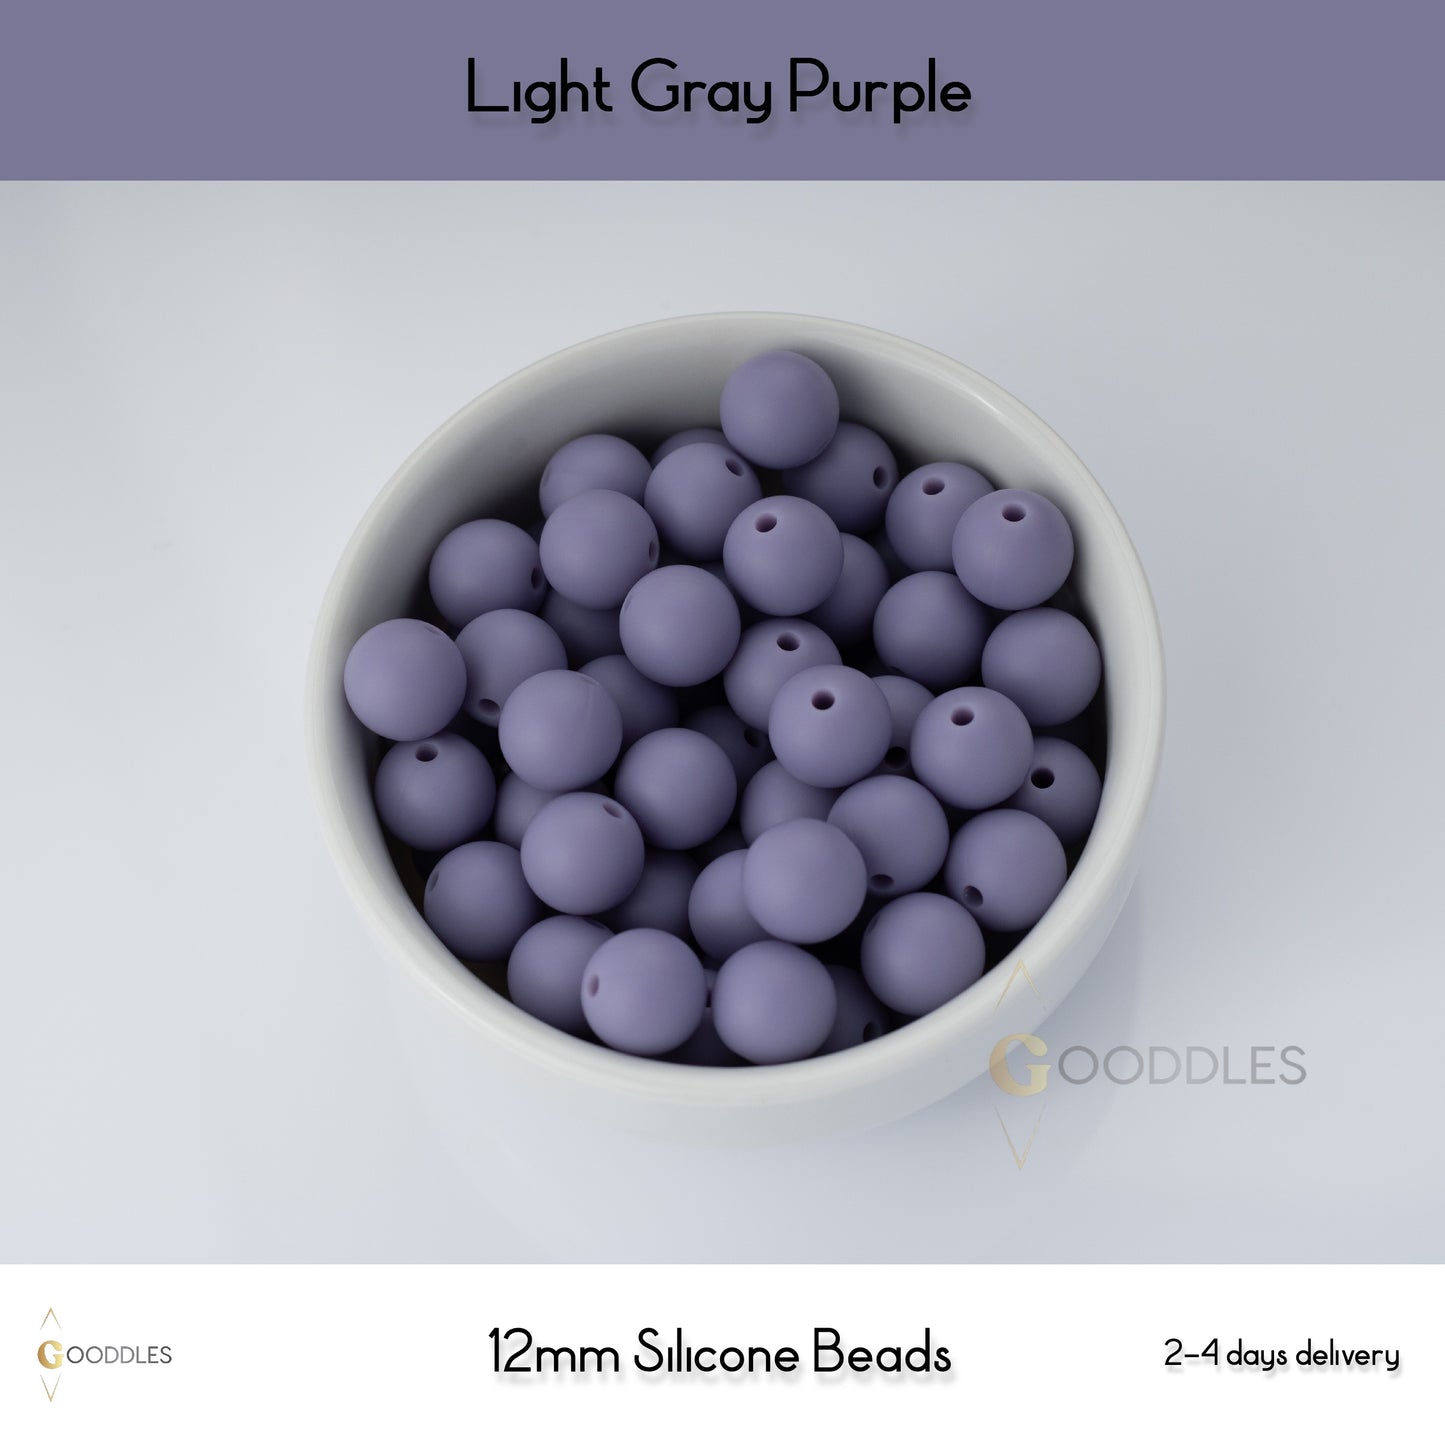 5pcs, Light Gray Purple Silicone Beads Round Silicone Beads